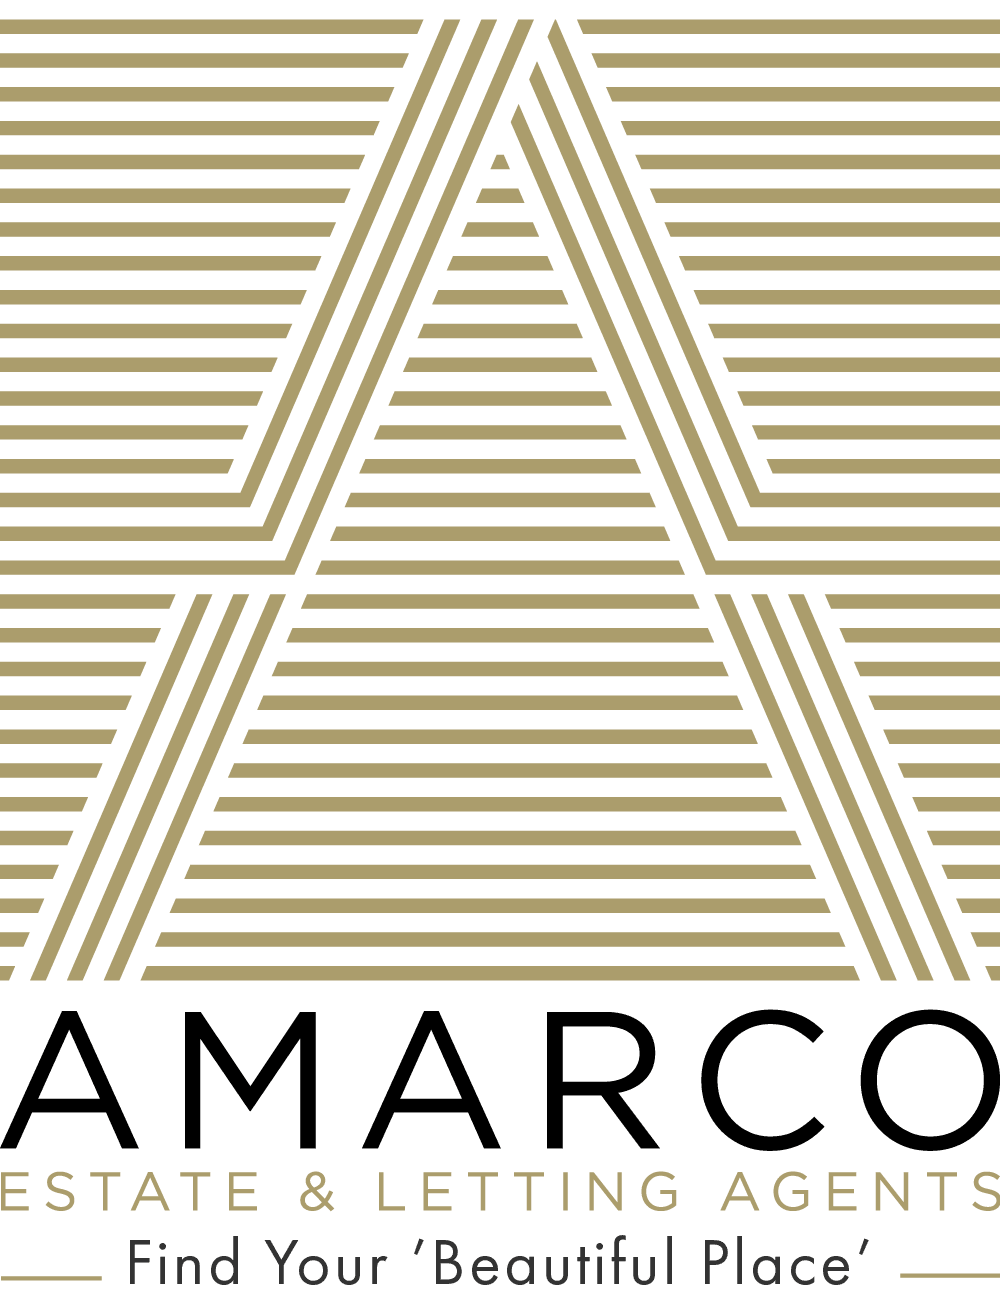 Amarco Estate & Letting Agents